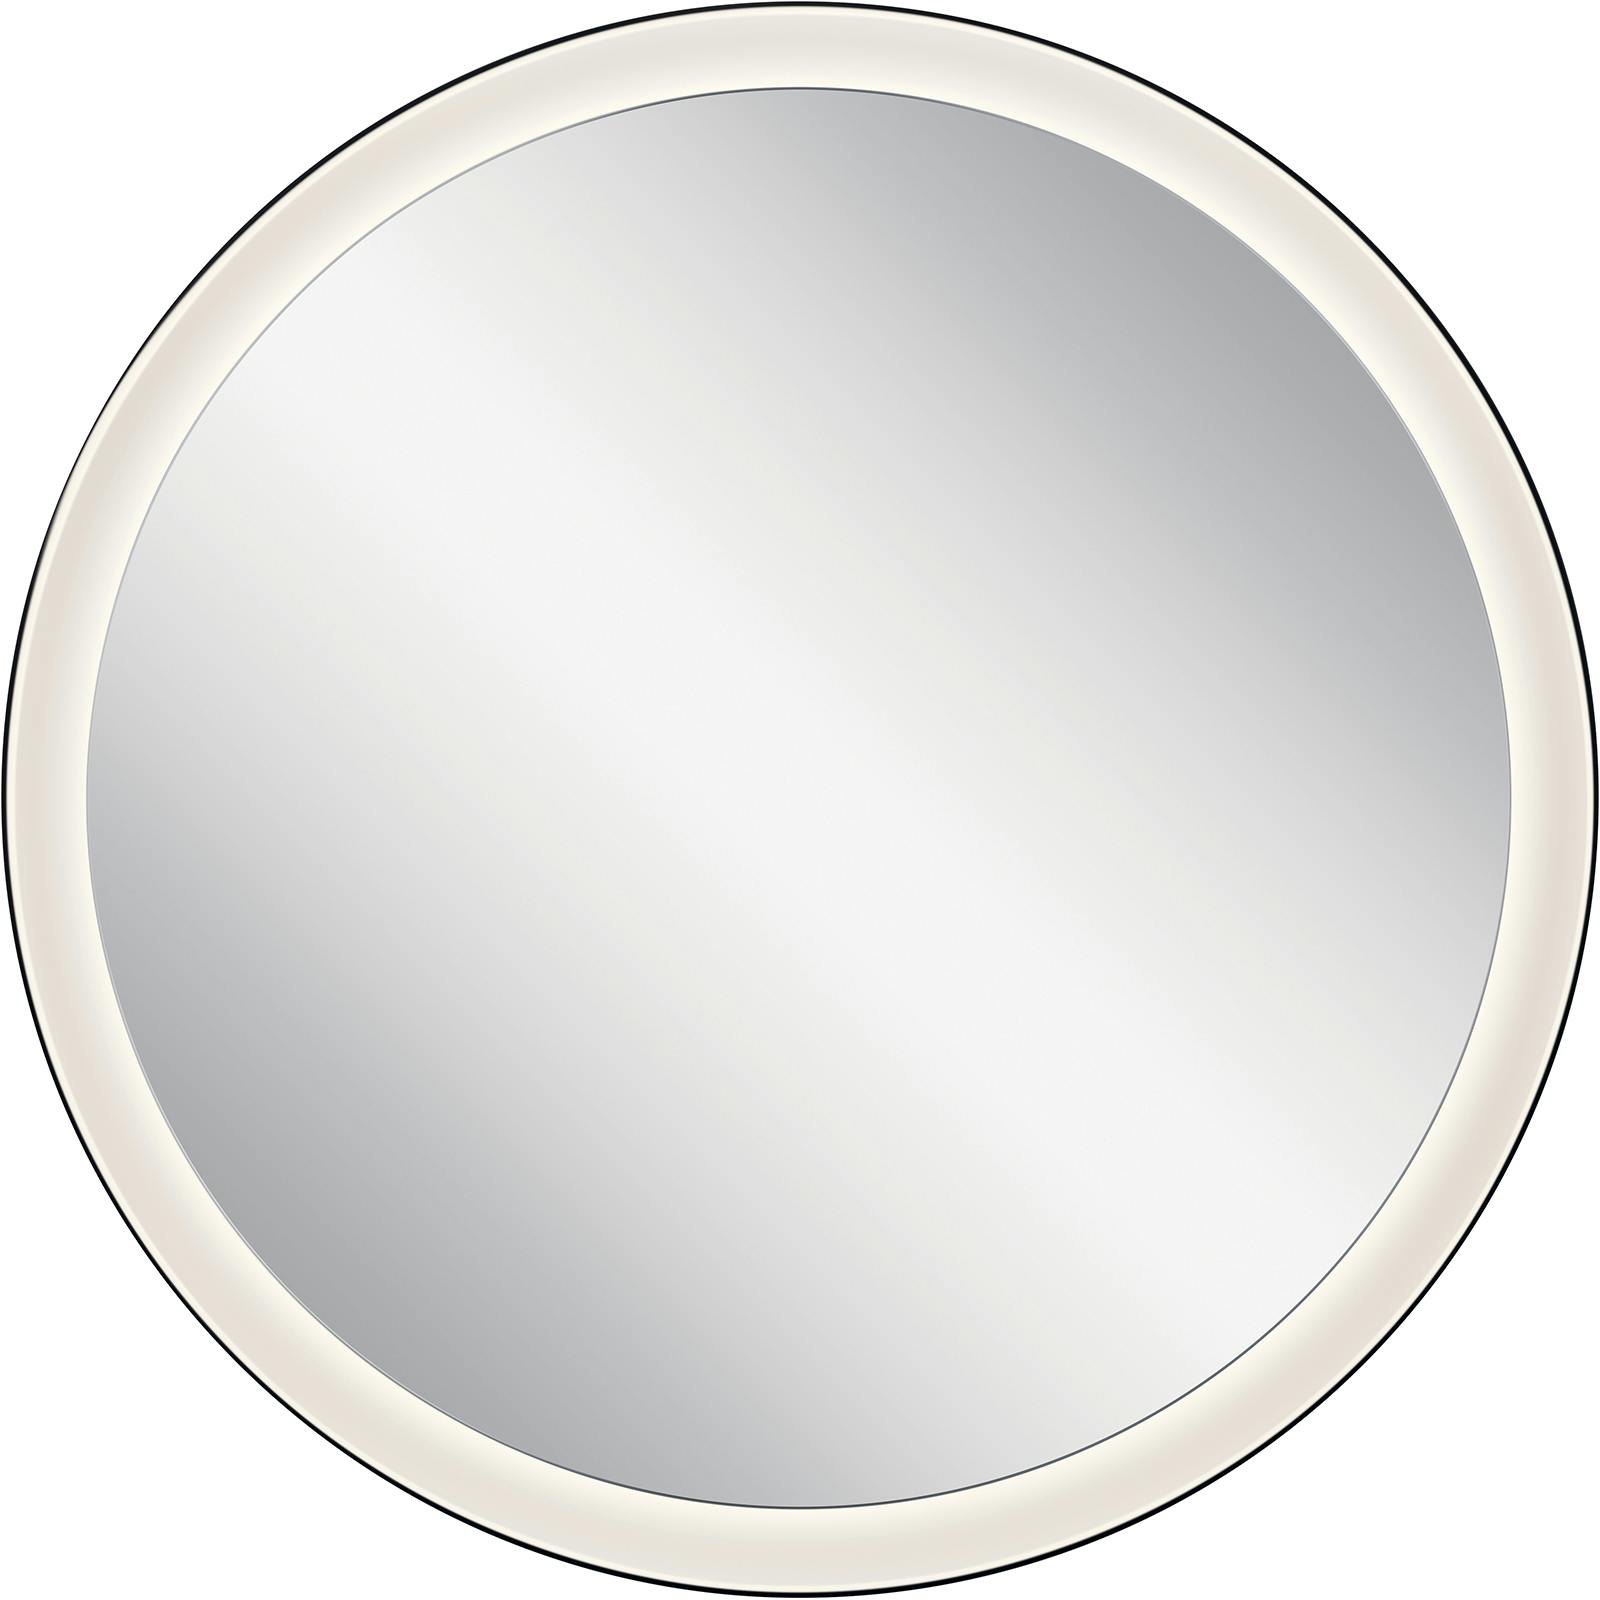 Front view of the Ryame™ Round Lighted Mirror Black on a white background